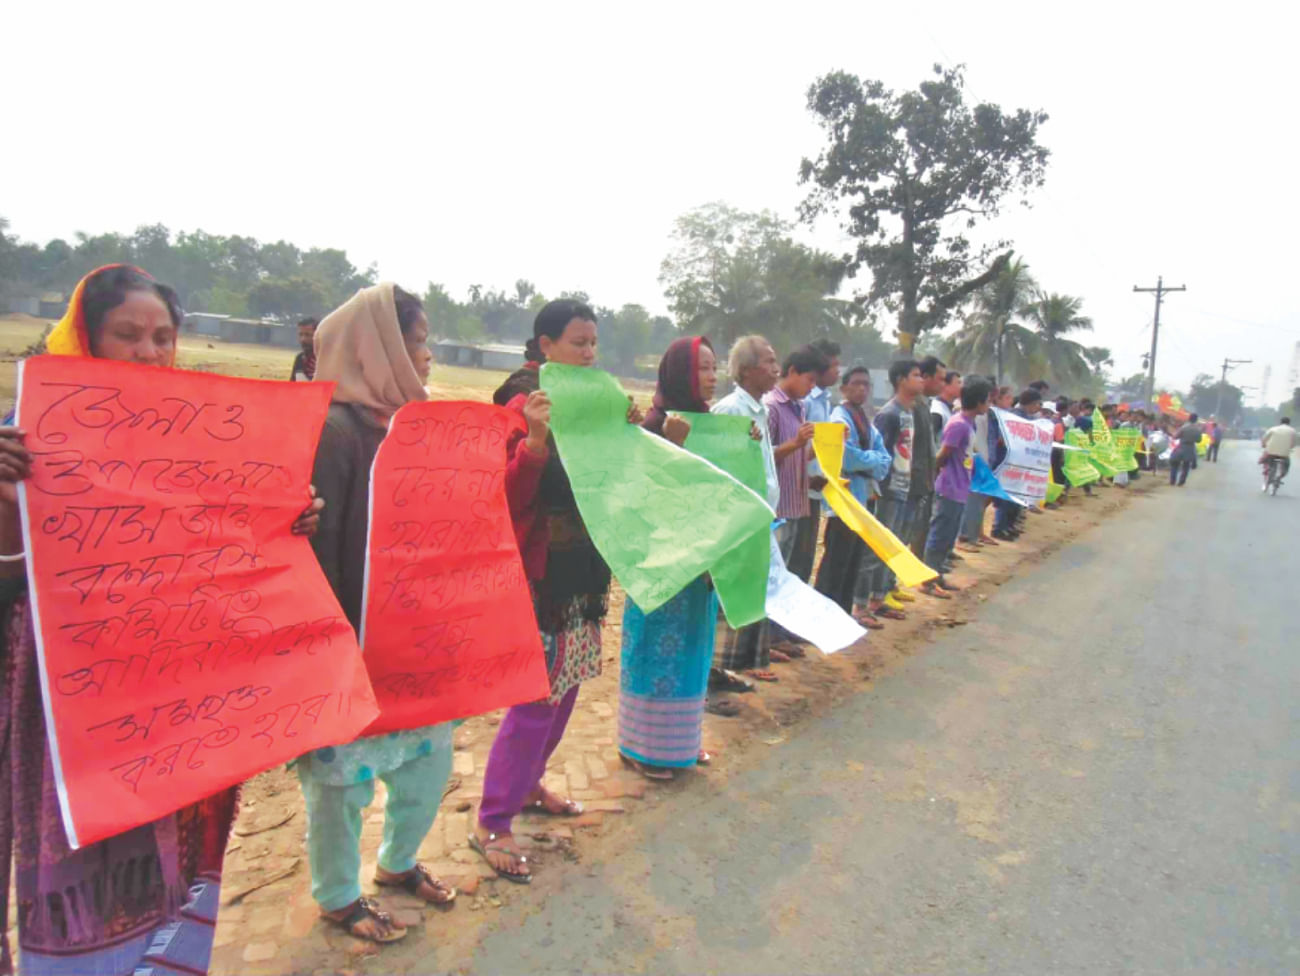 Indigenous people form a human chain at Jalchhatra in Madhupur upazila under Tangail district yesterday demanding proper steps for ensuring legal ownership of their land and withdrawal of 'false' cases filed against them. PHOTO: STAR